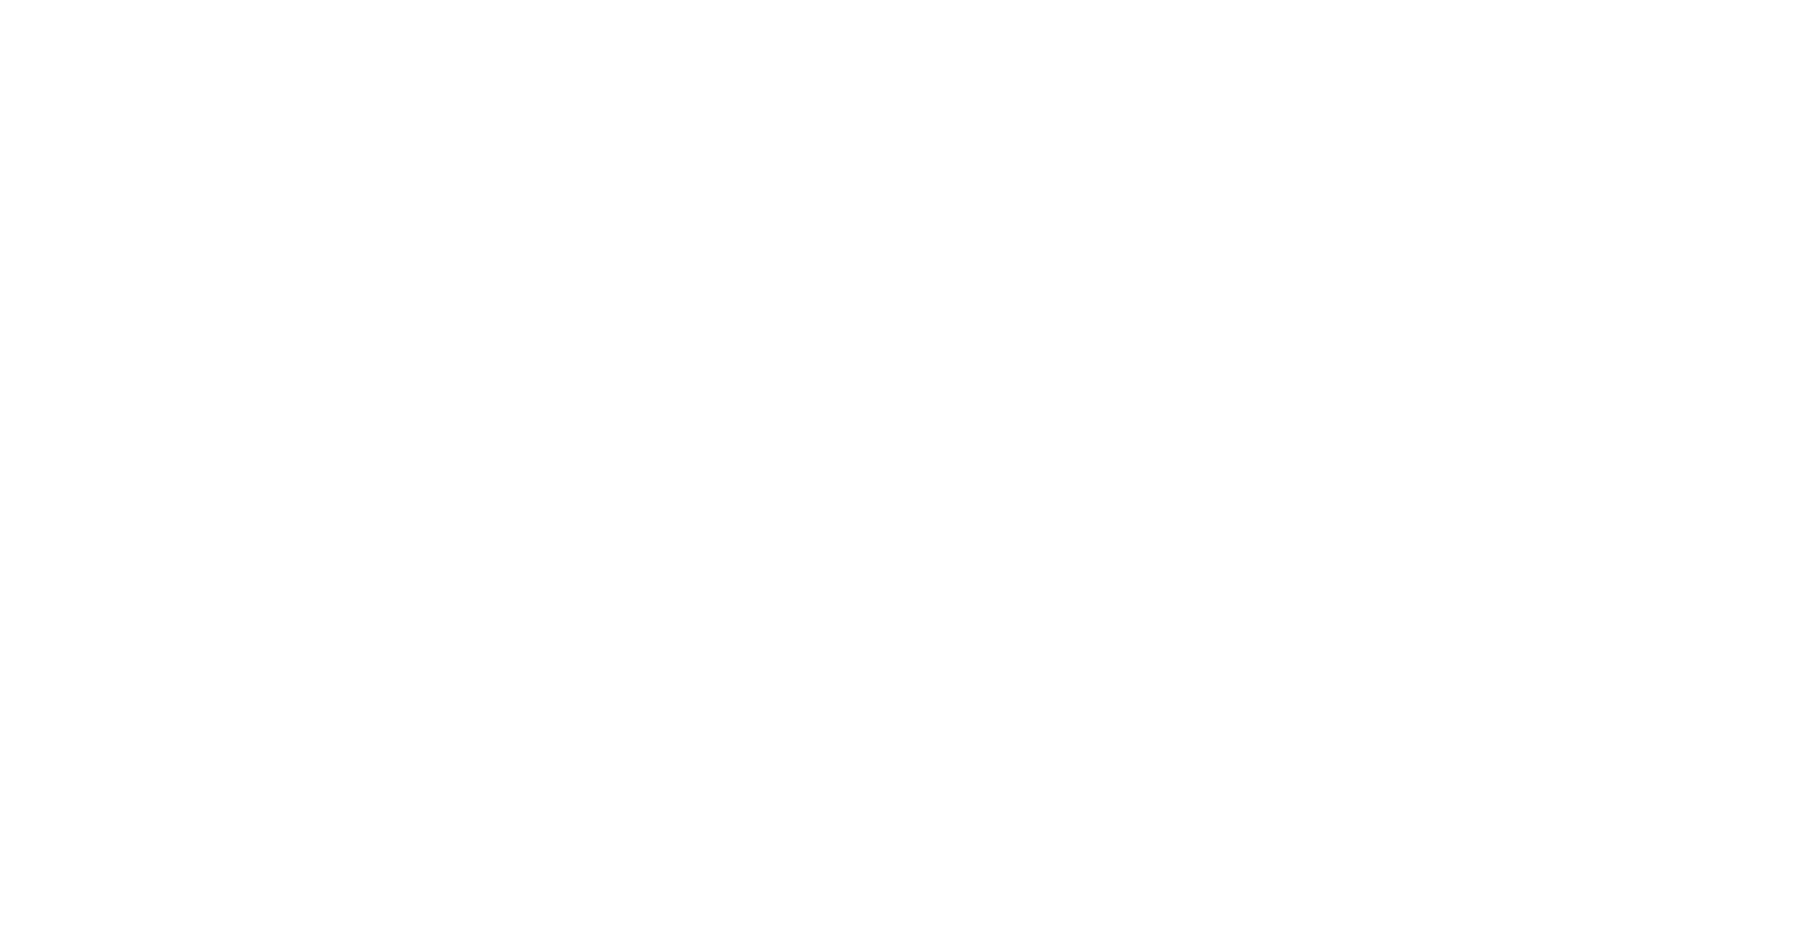 The Village at Center Street Crossing